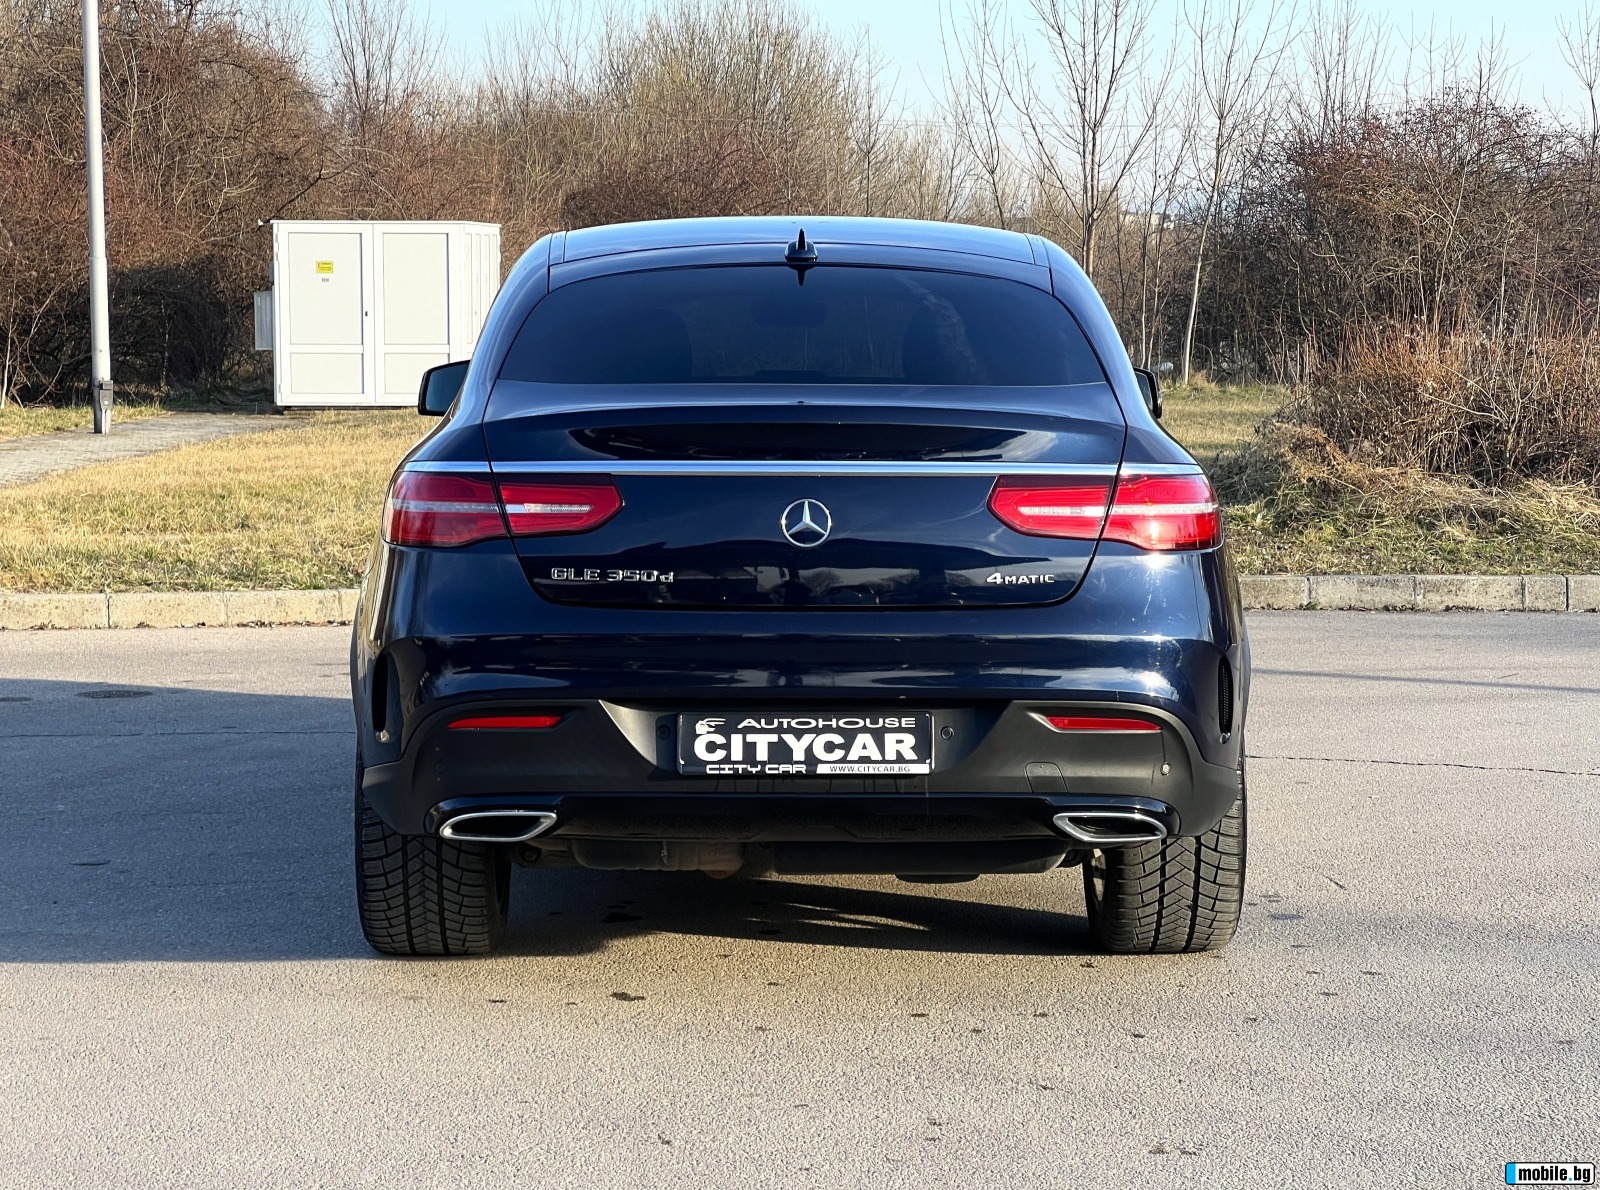 Mercedes-Benz GLE 350 d/ AMG/ COUPE/ 4MATIC/ NIGHT/AIRMATIC/360 CAM/ 21/ | Mobile.bg   5